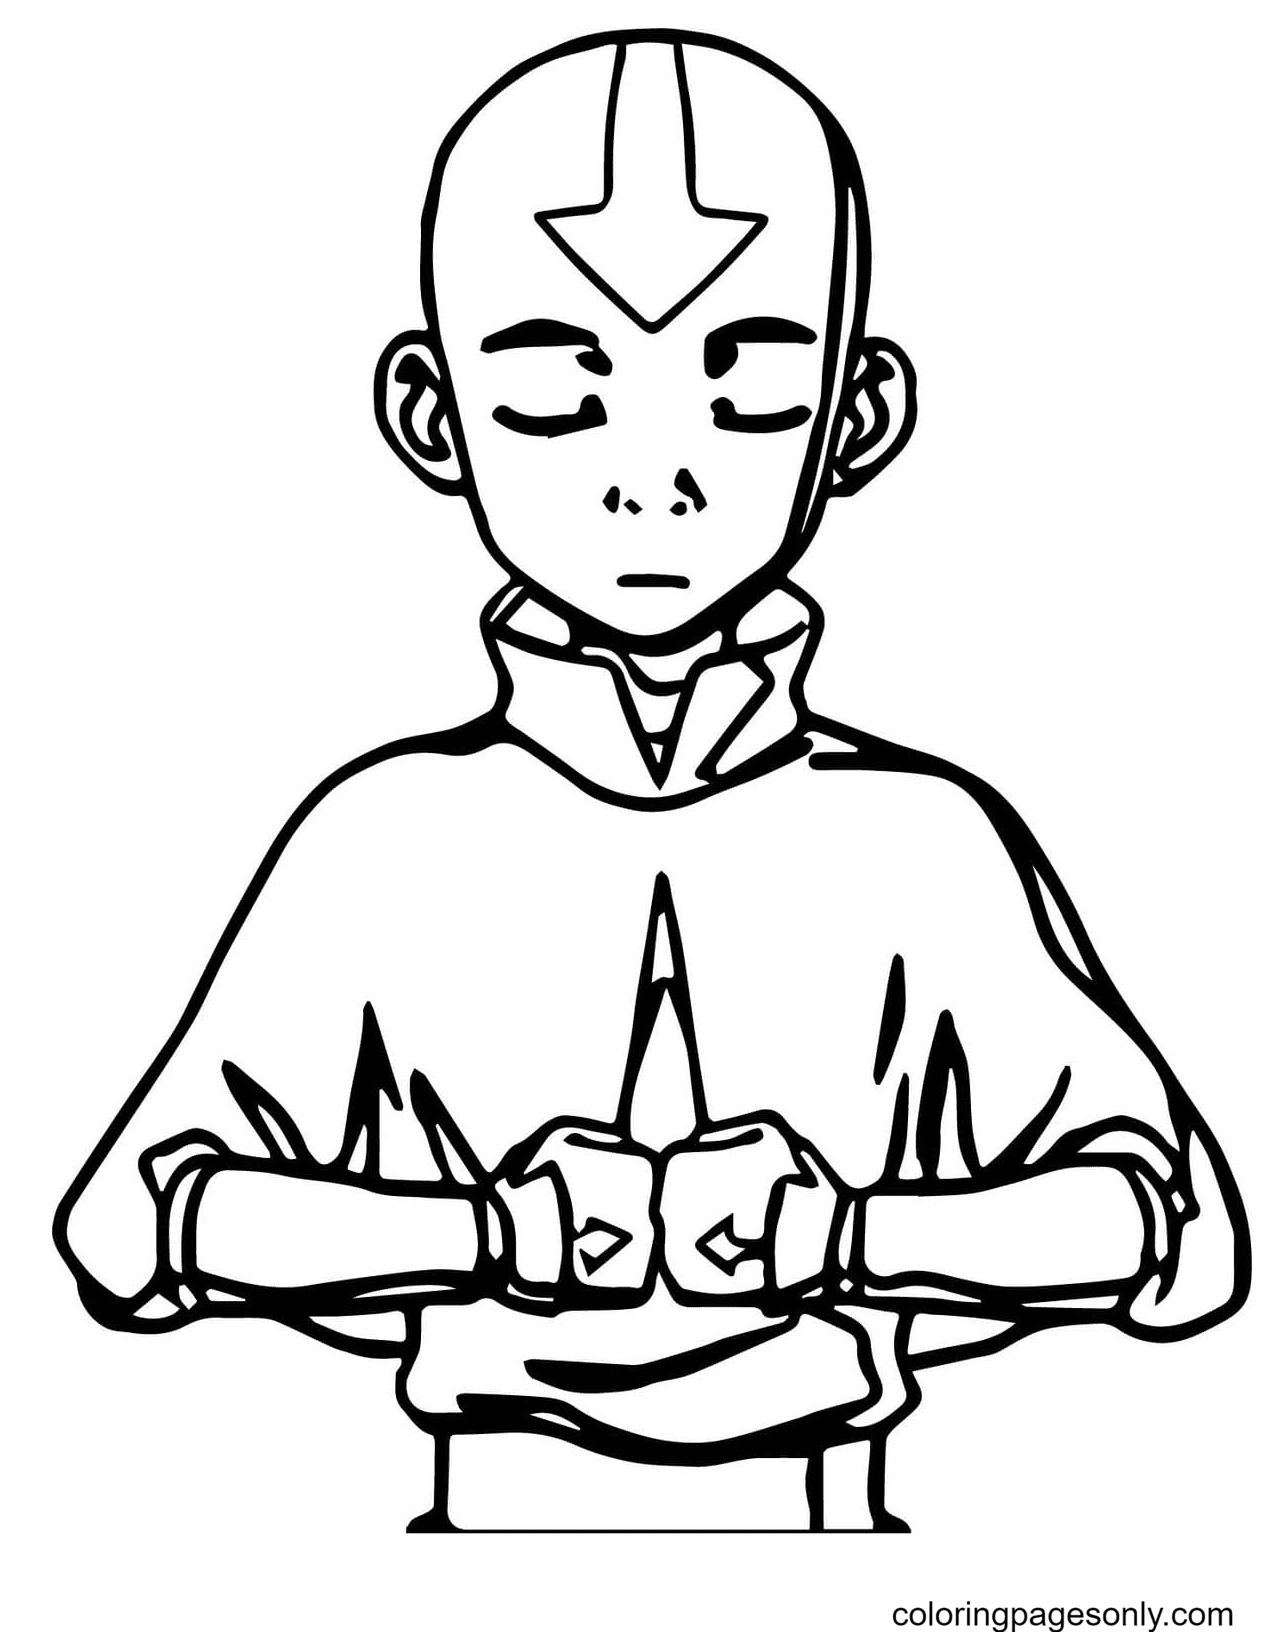 Aang With Closed Eyes Coloring Pages